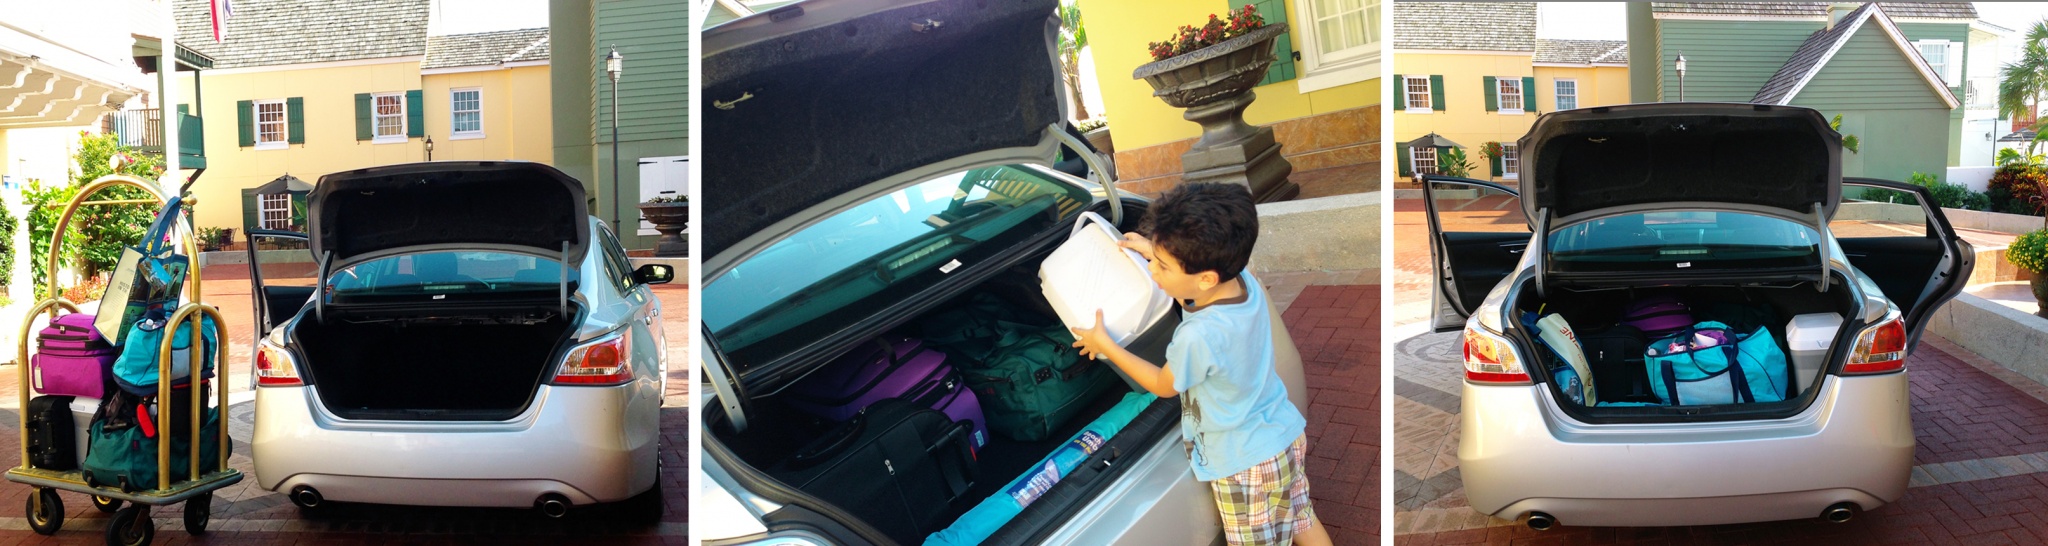 packing luggage in trunk Nissan Altima